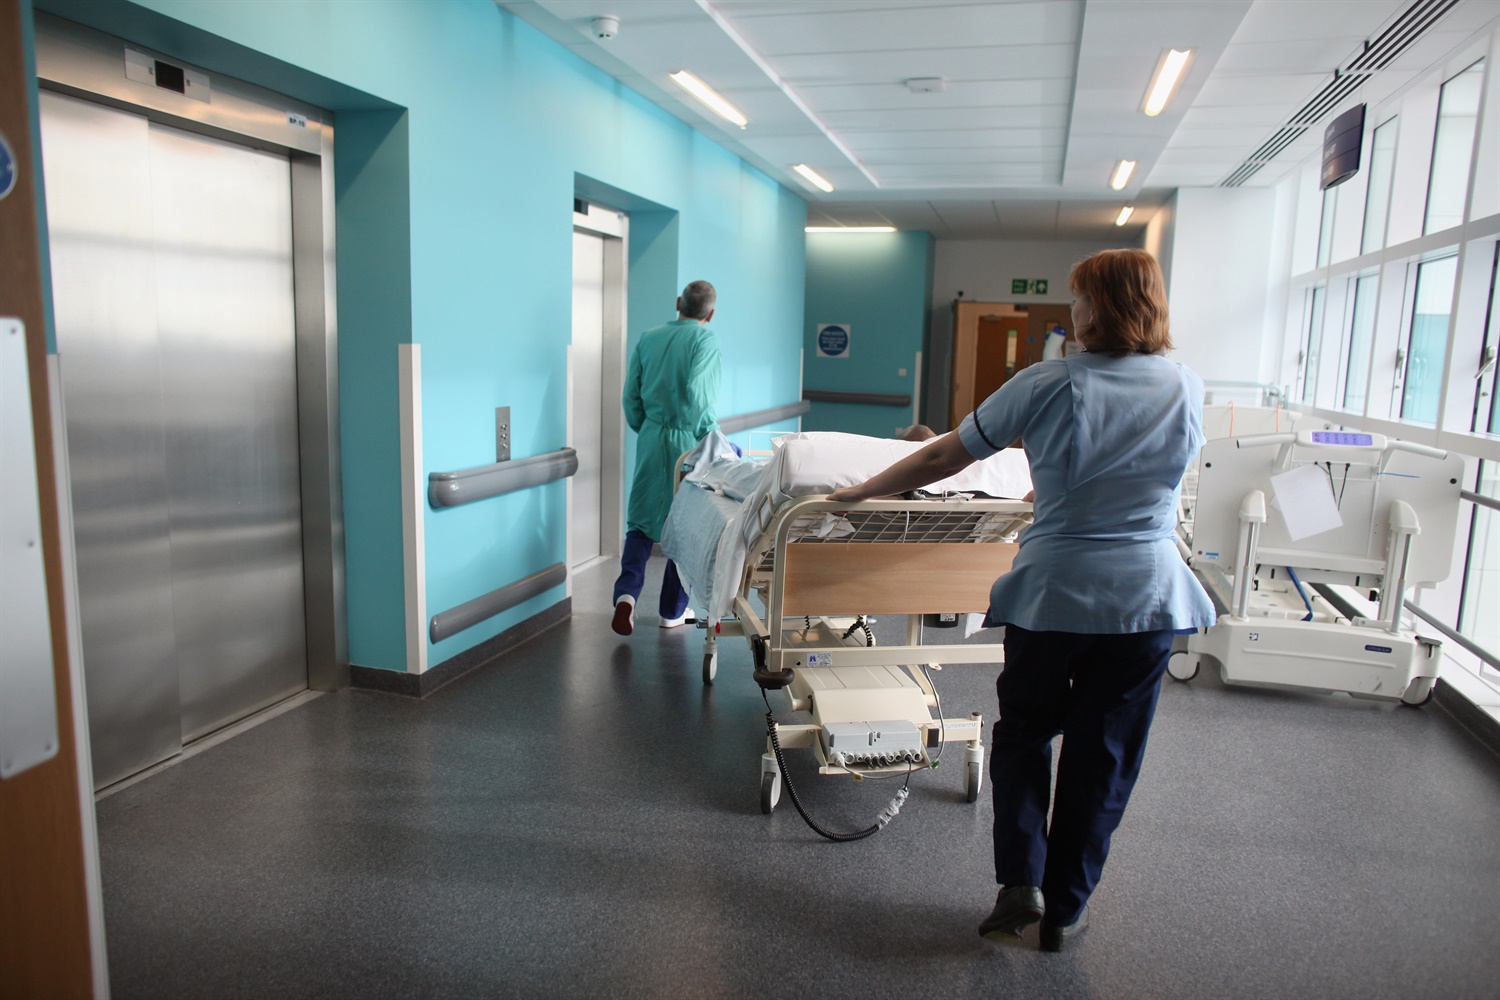 A patient is taken to the operating theatre in the recently opened Birmingham Queen Elizabeth Hospital on February 7, 2011